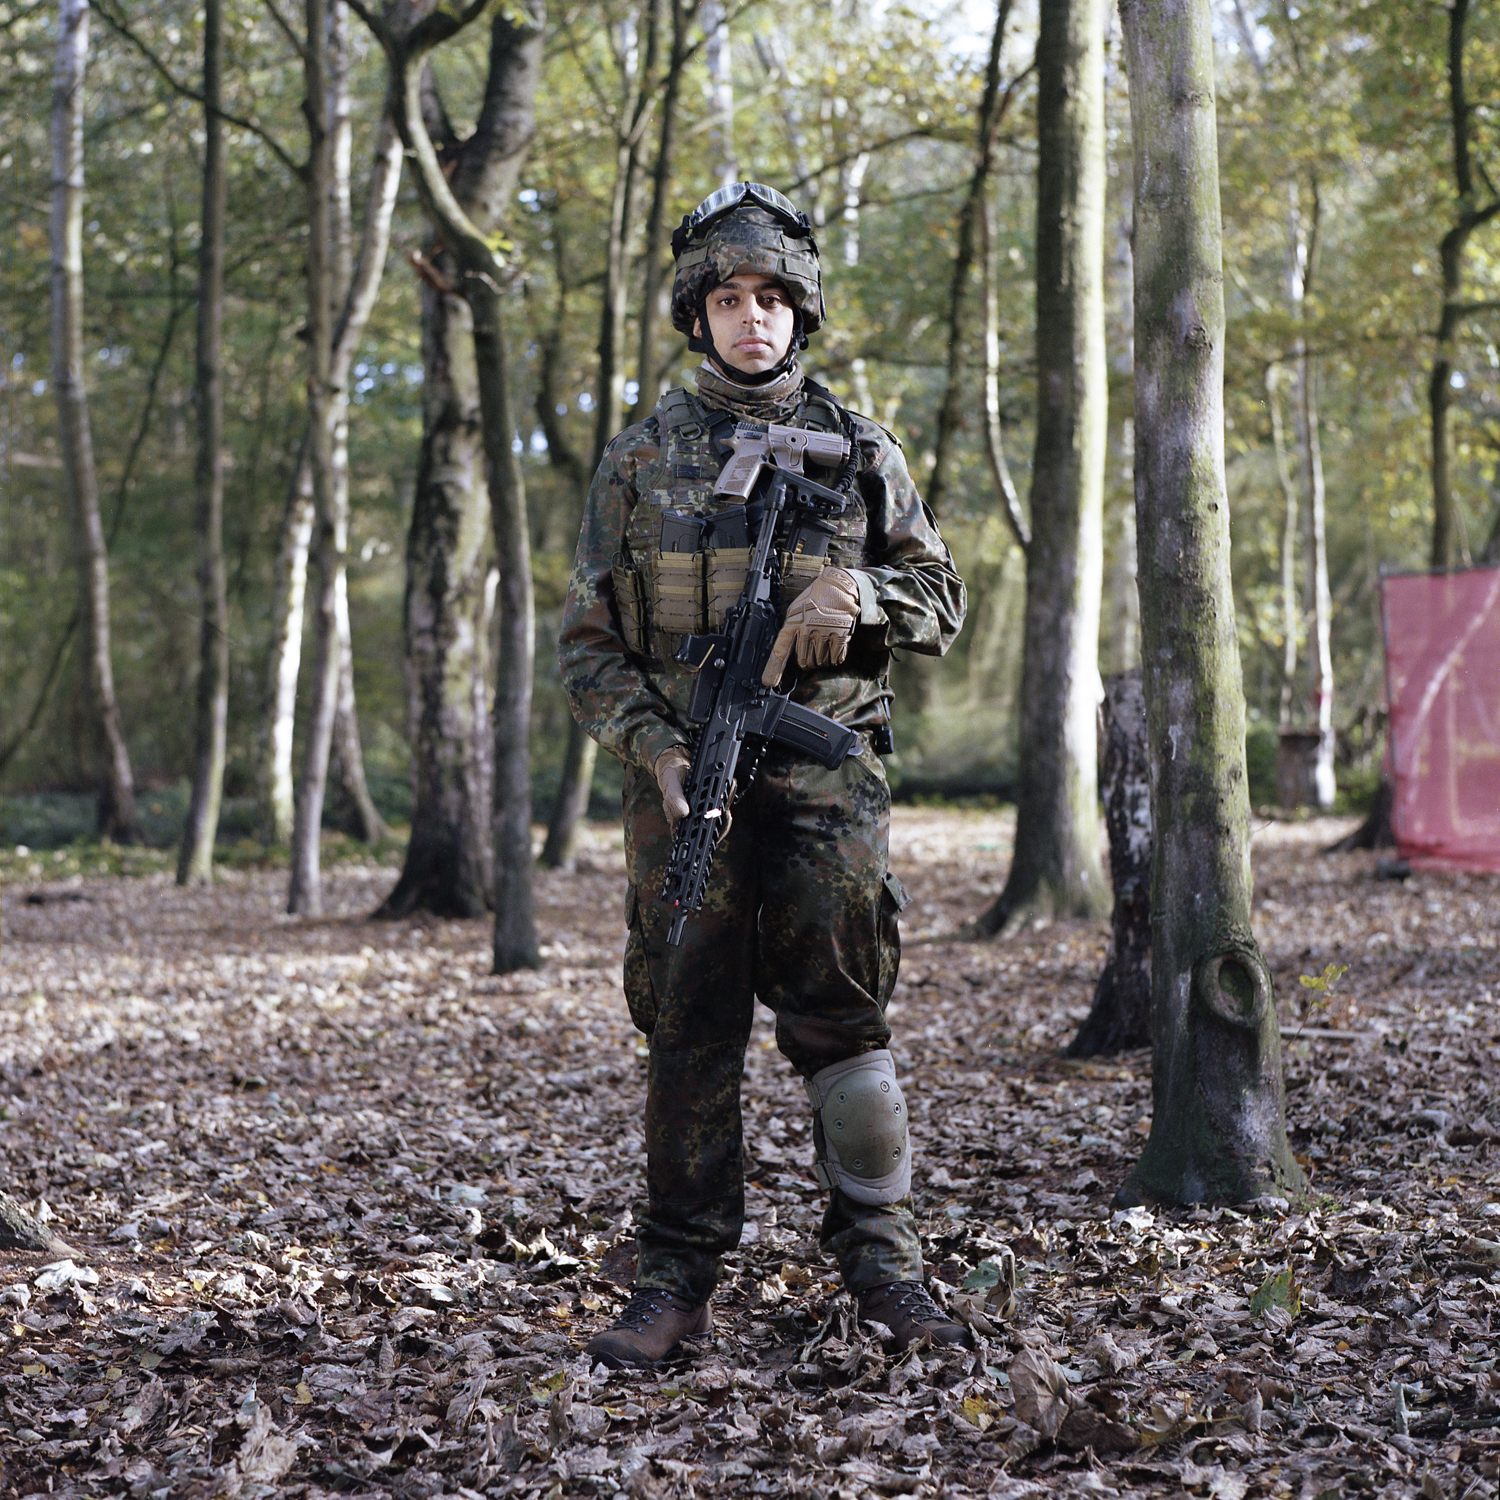 A young man wearing Russian camouflage stands in front of the camera, with a toy rifle slung against his chest.